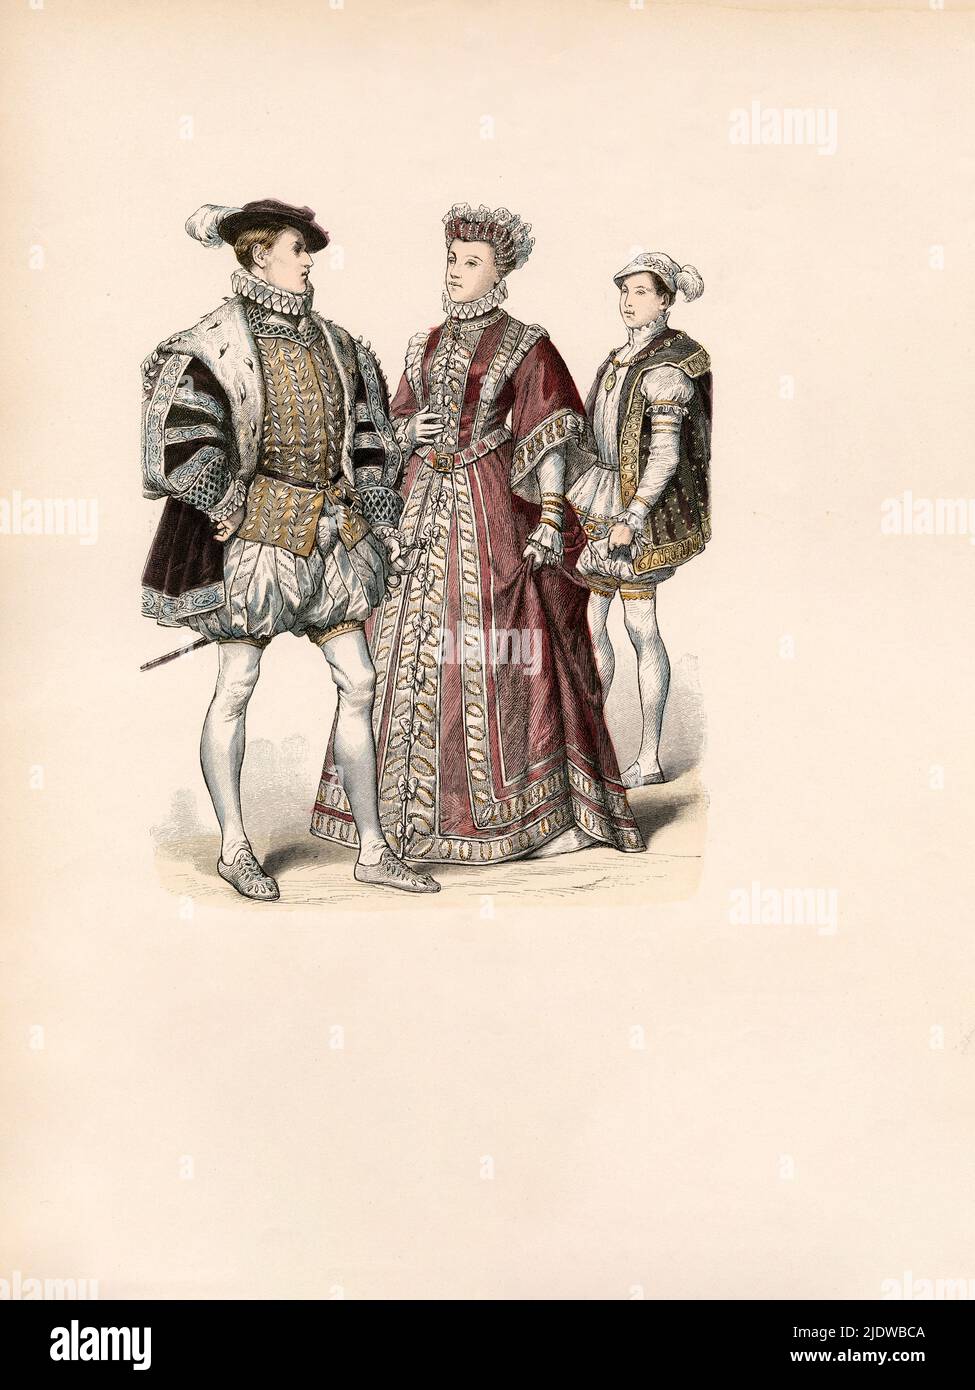 Francis II (1543-1560), Elizabeth (Daughter of Henry II) as a Bride (1545-1568), Francis II as Dauphin - Oldest Son of King, France, 16th Century, Illustration, The History of Costume, Braun & Schneider, Munich, Germany, 1861-1880 Stock Photo